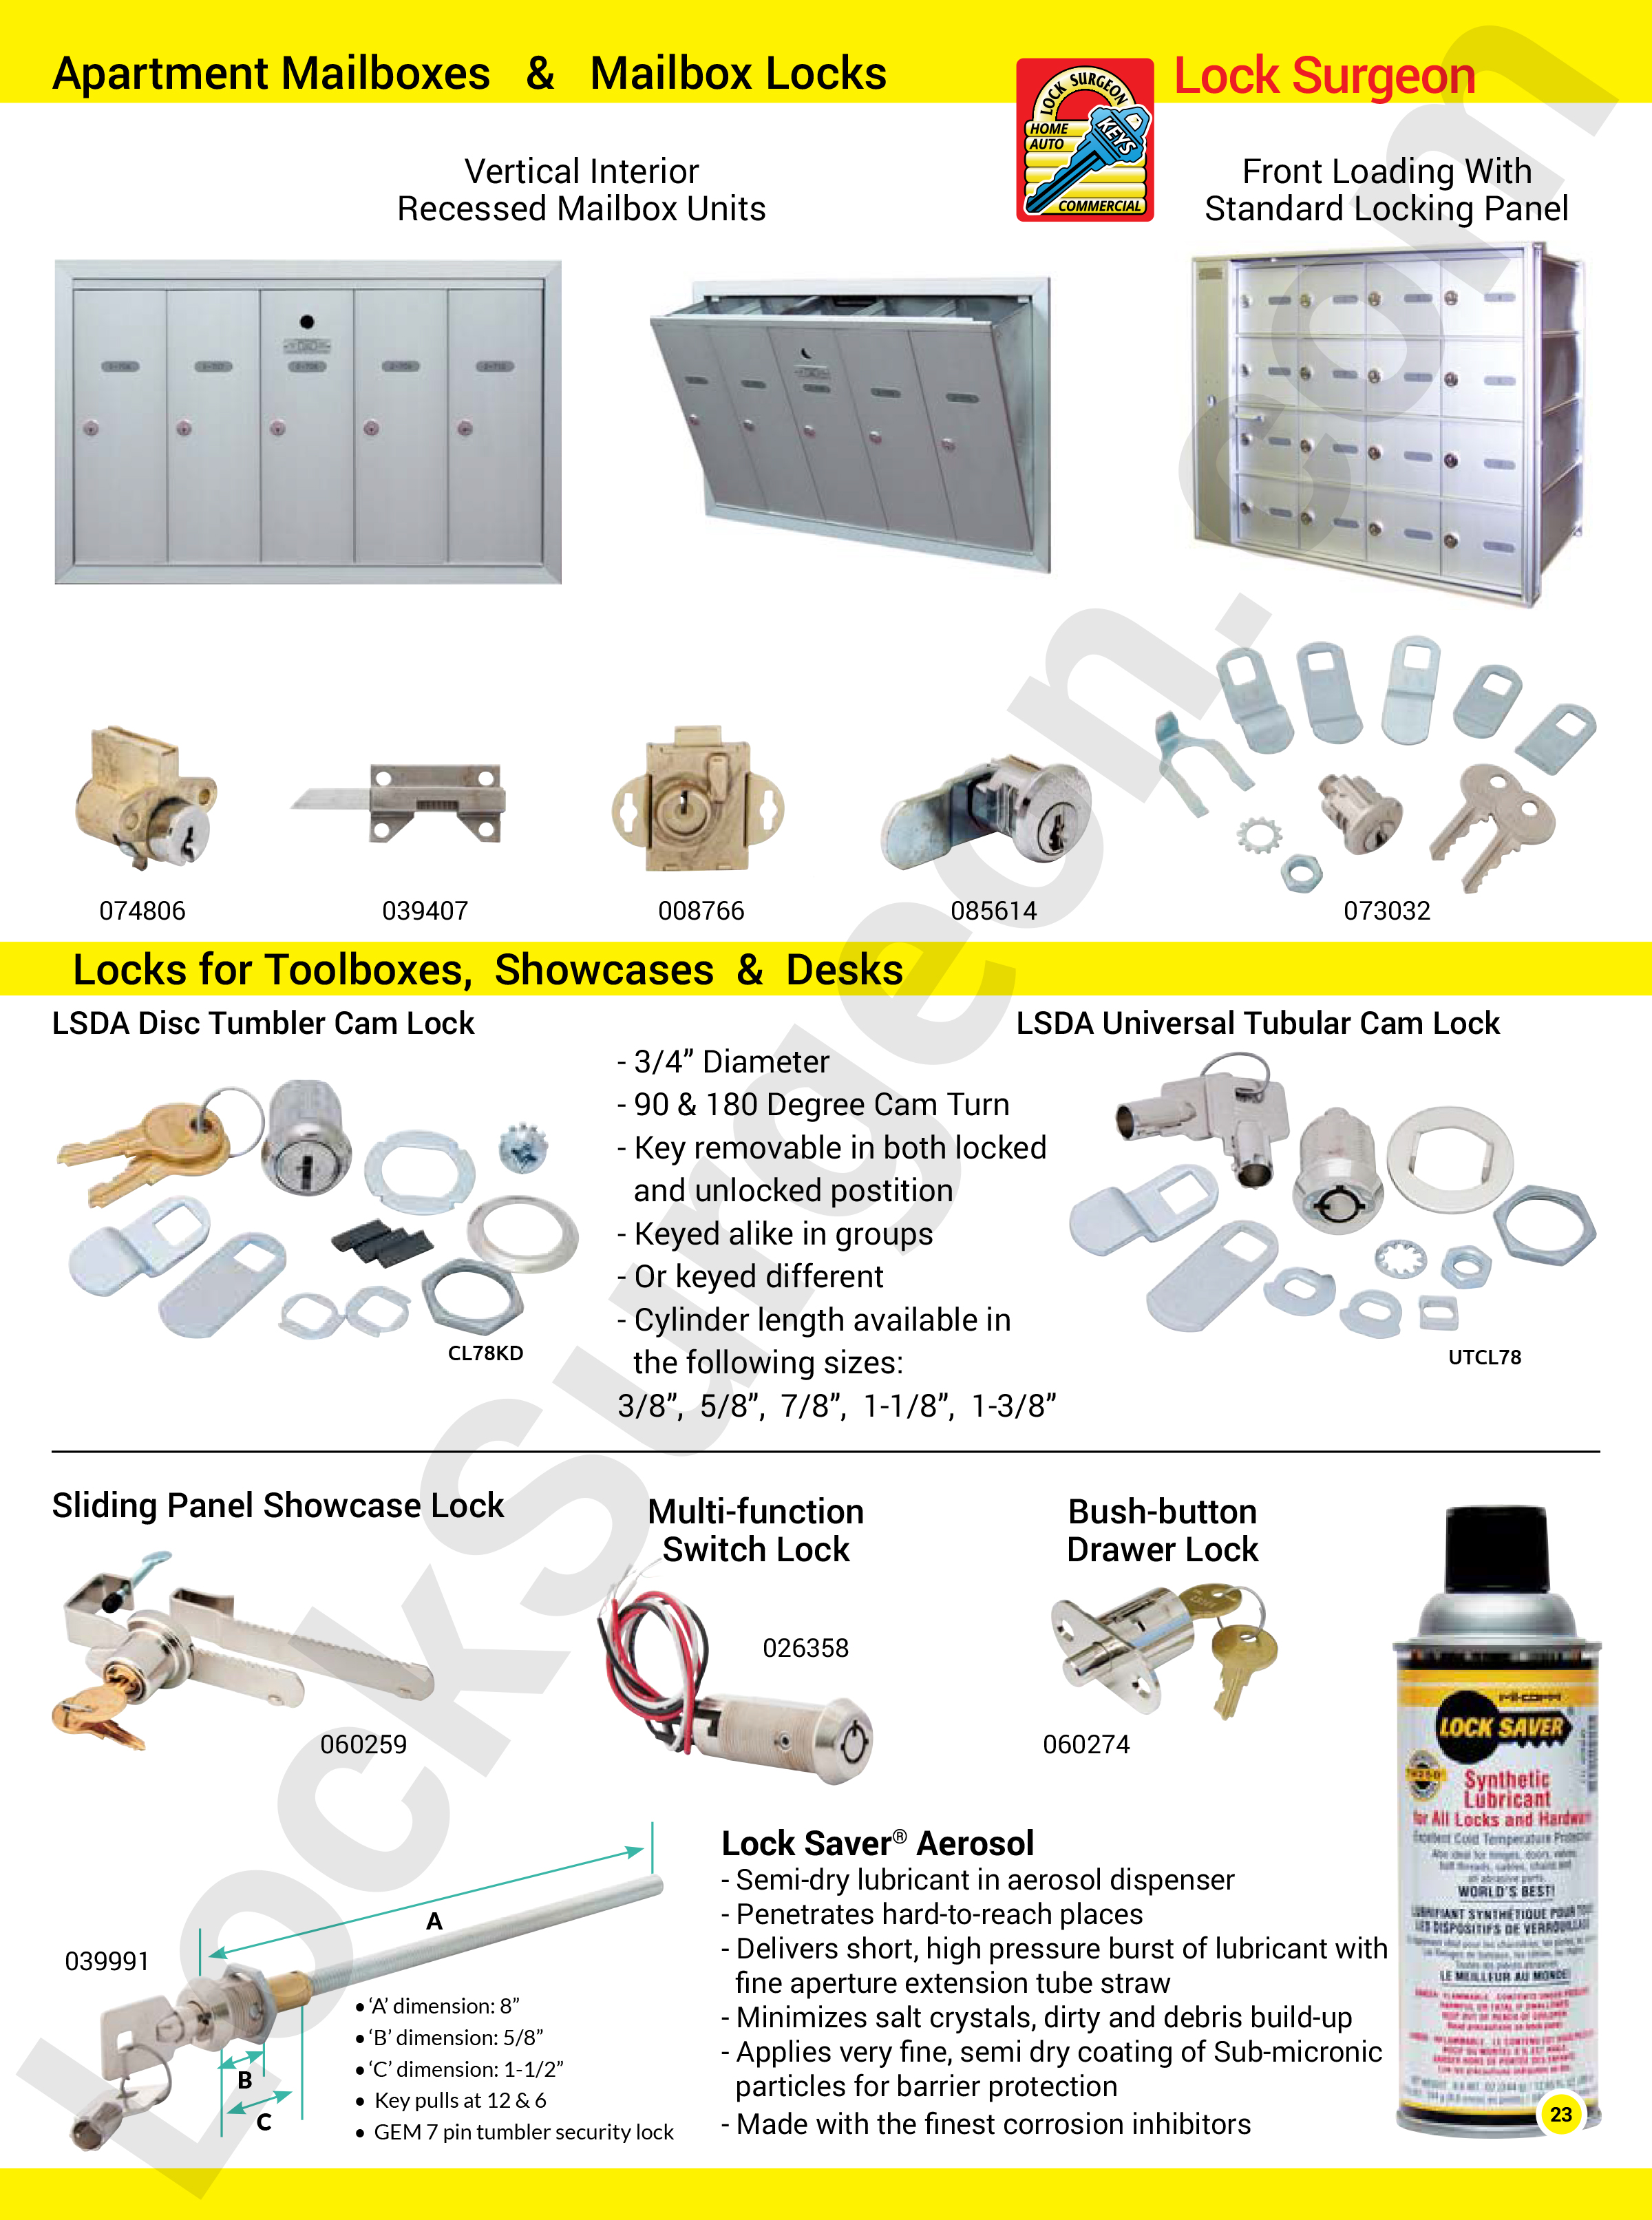 Lock Surgeon carry vertical interior recessed mailbox units, front loading with standard locking panel as well as replacement locks and keys. Tumbler cam locks for toolboxes, showcases and desks. Sliding panel showcase locks, multi-function switch locks, Push-button drawer locks for all your tumbler cam lock needs.